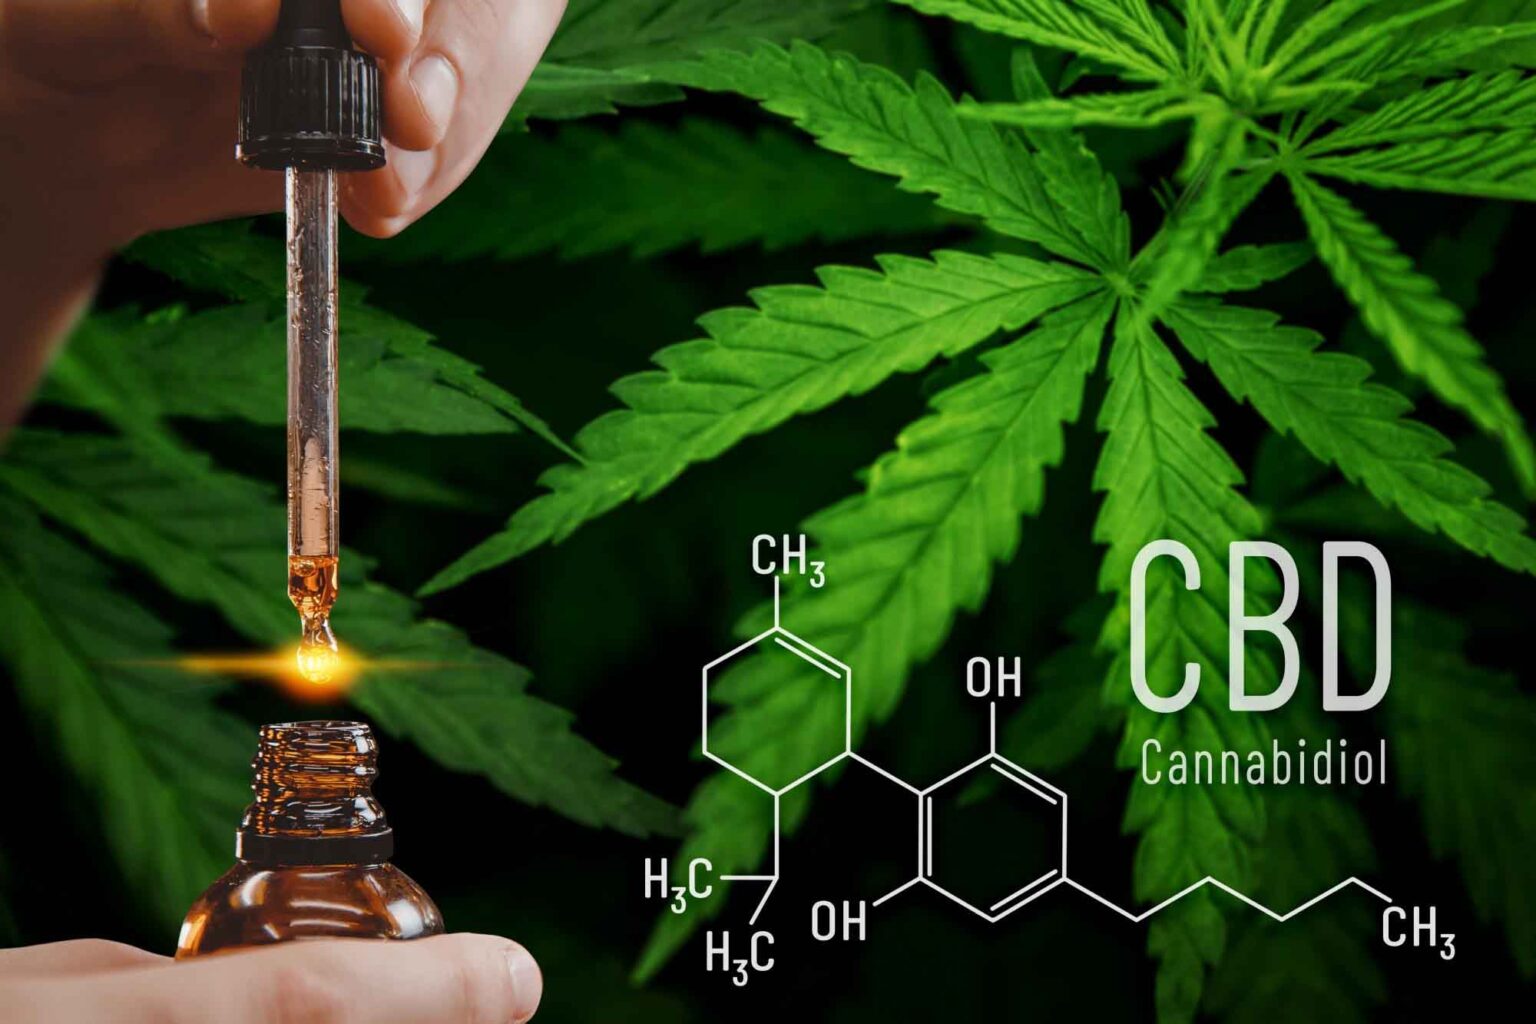 Wondering what the benefits of CBD are and if it's right for you? Here's what you need to know about the substance.